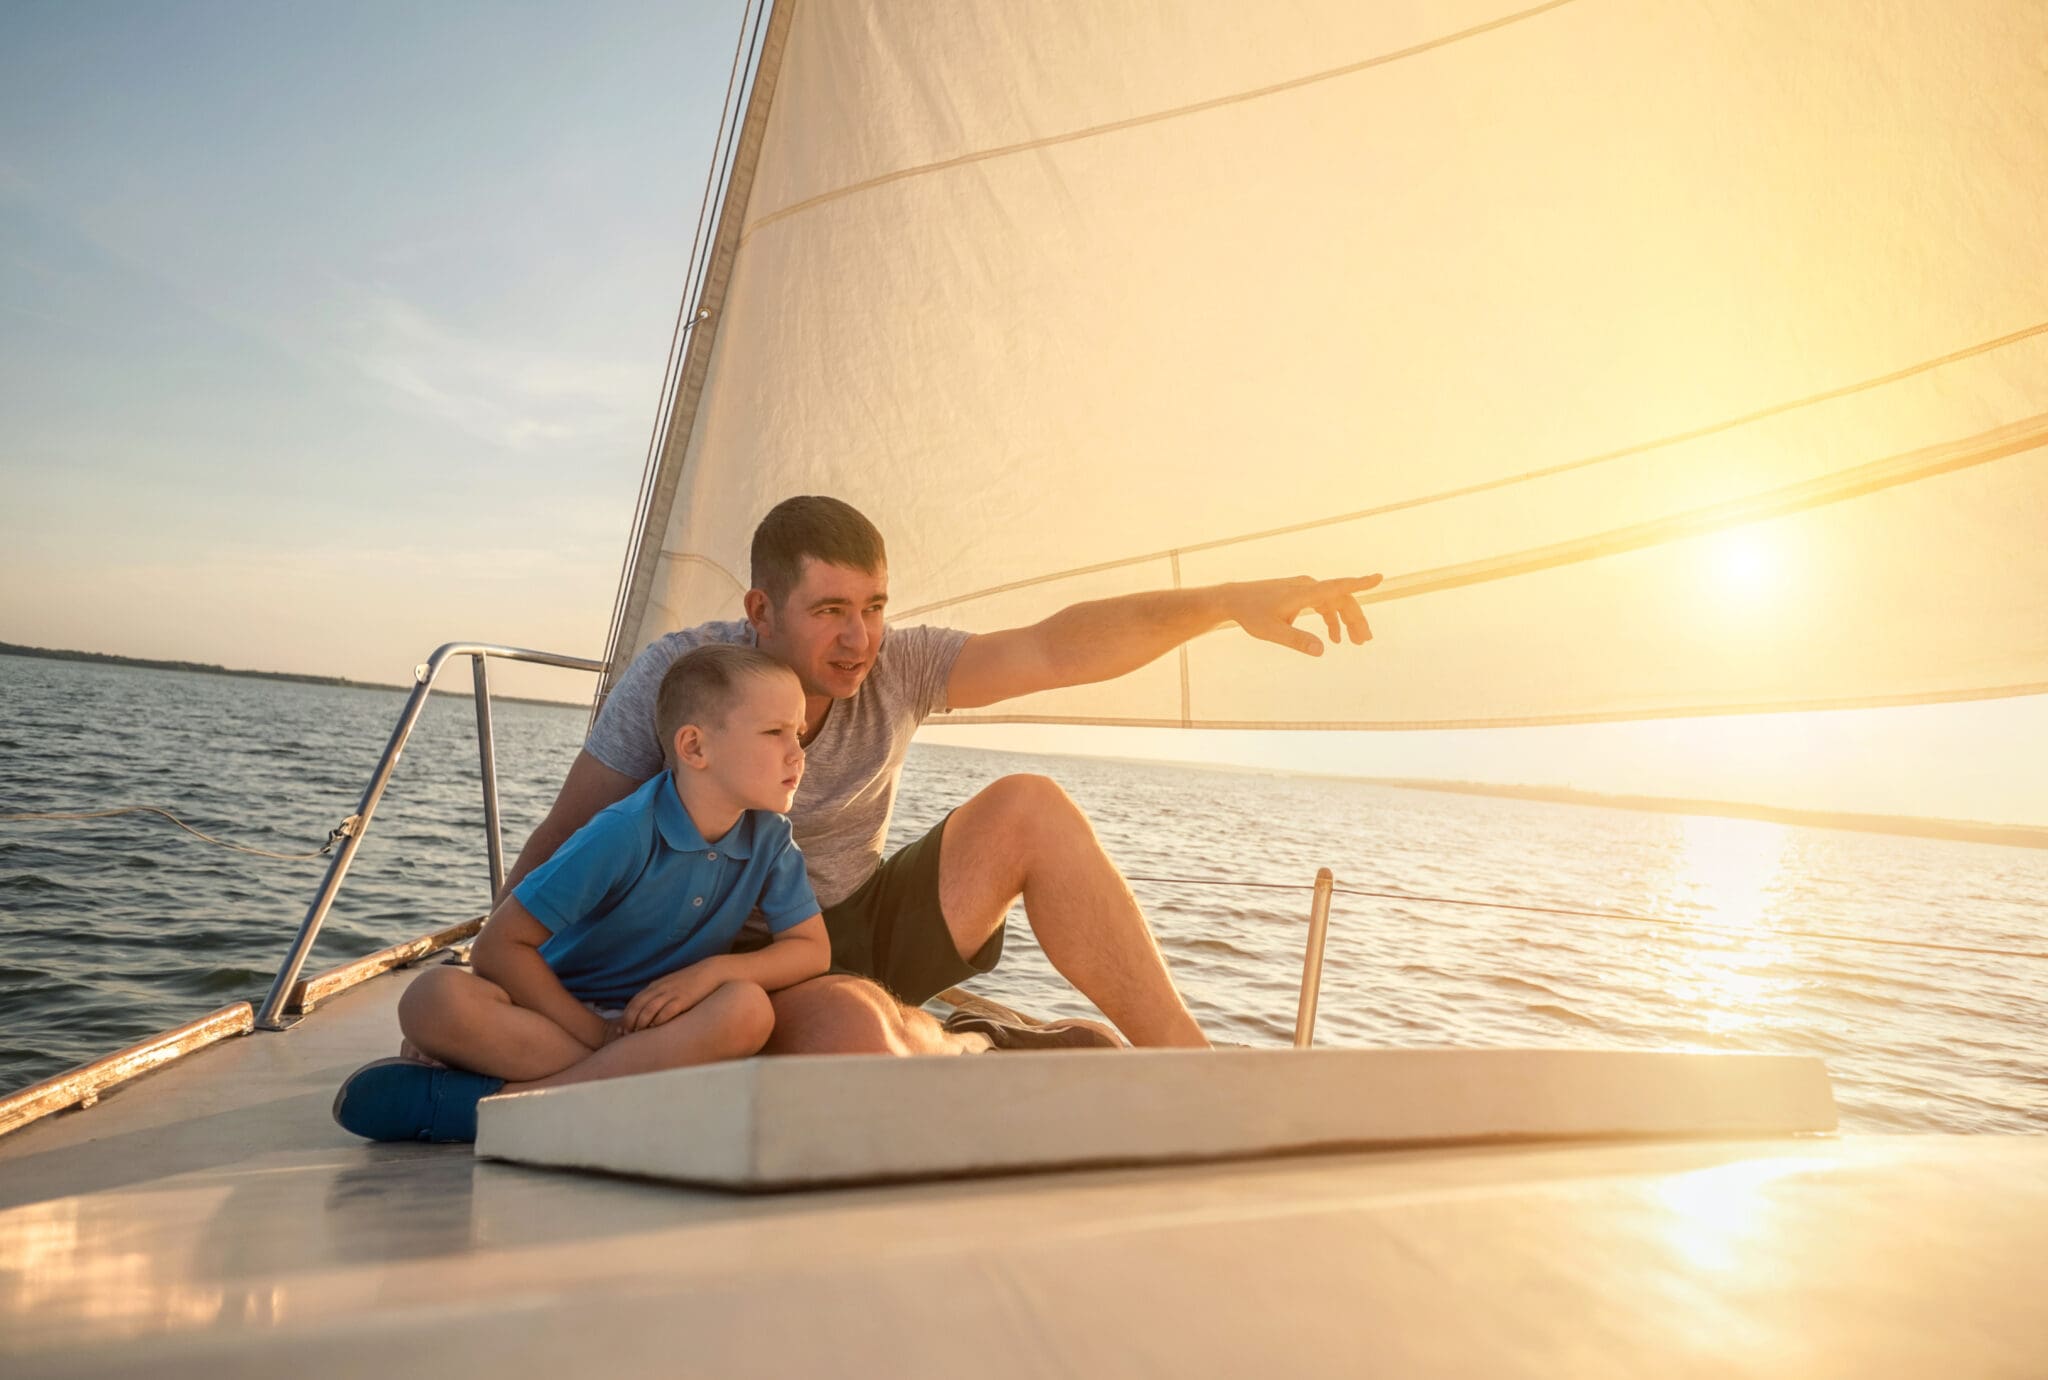 Boat Share - the perfect path to boat ownership